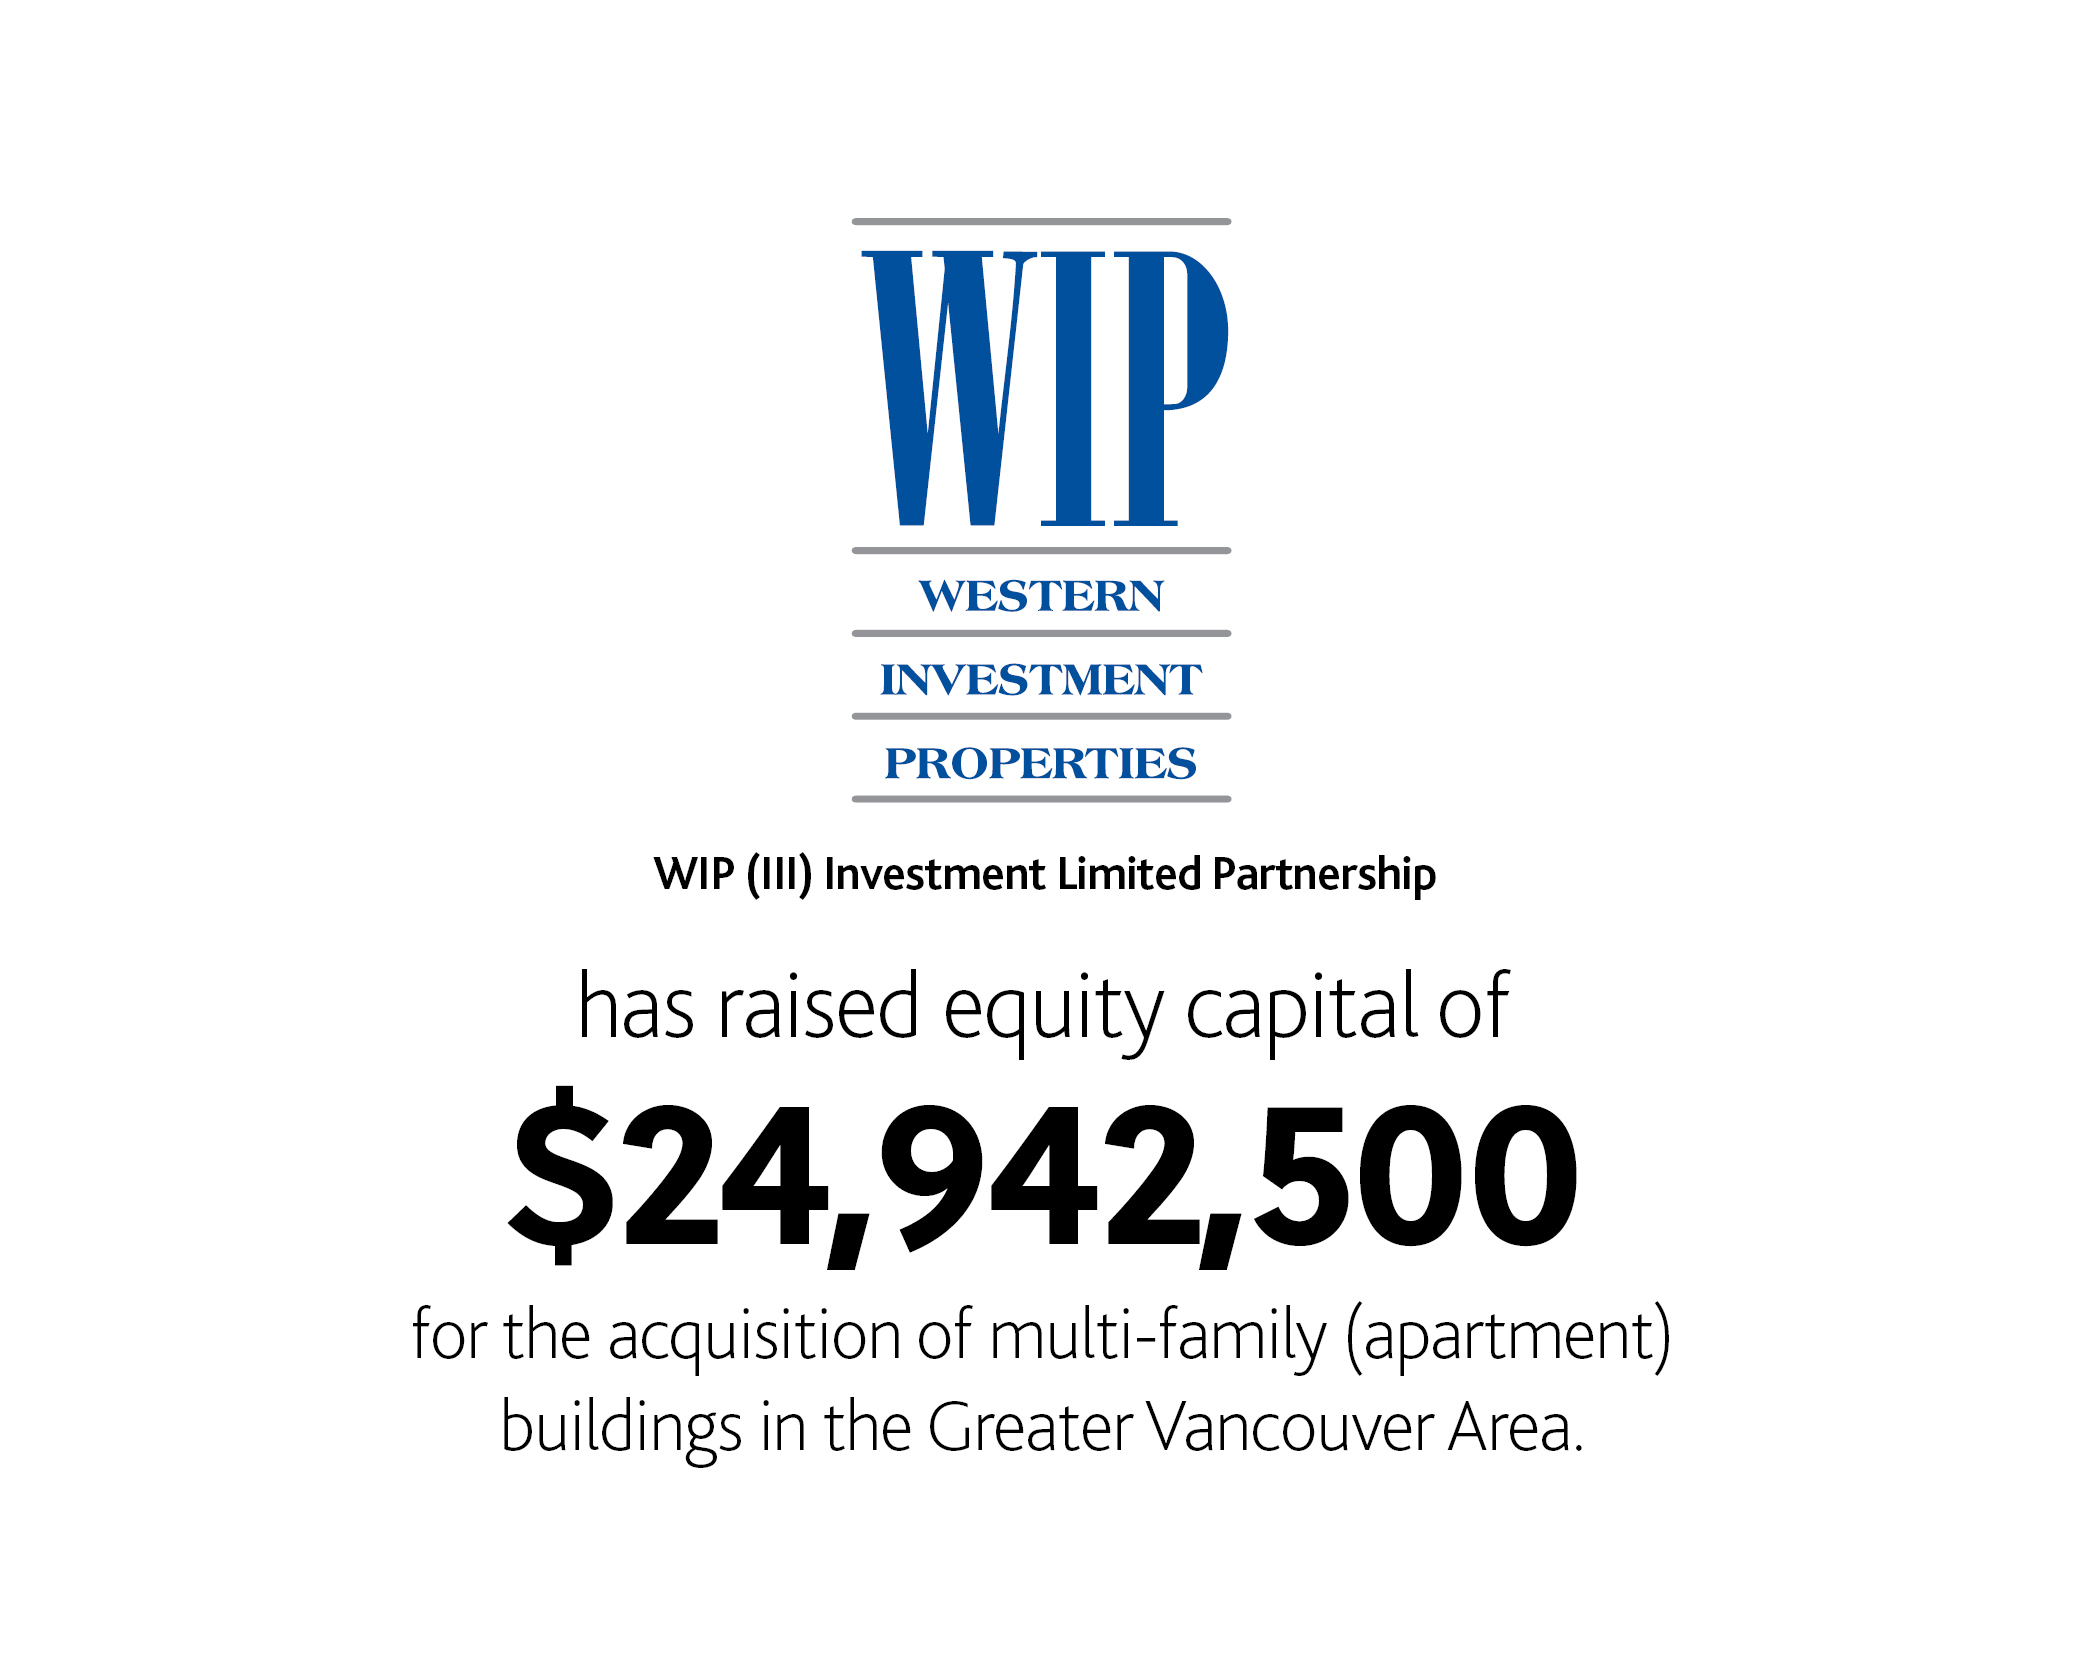 WIP (III) Investment LP has raised equity capital of $24,942,500 for the acquisition of multi-family (apartments) buildings in the Greater Vancouver Area.